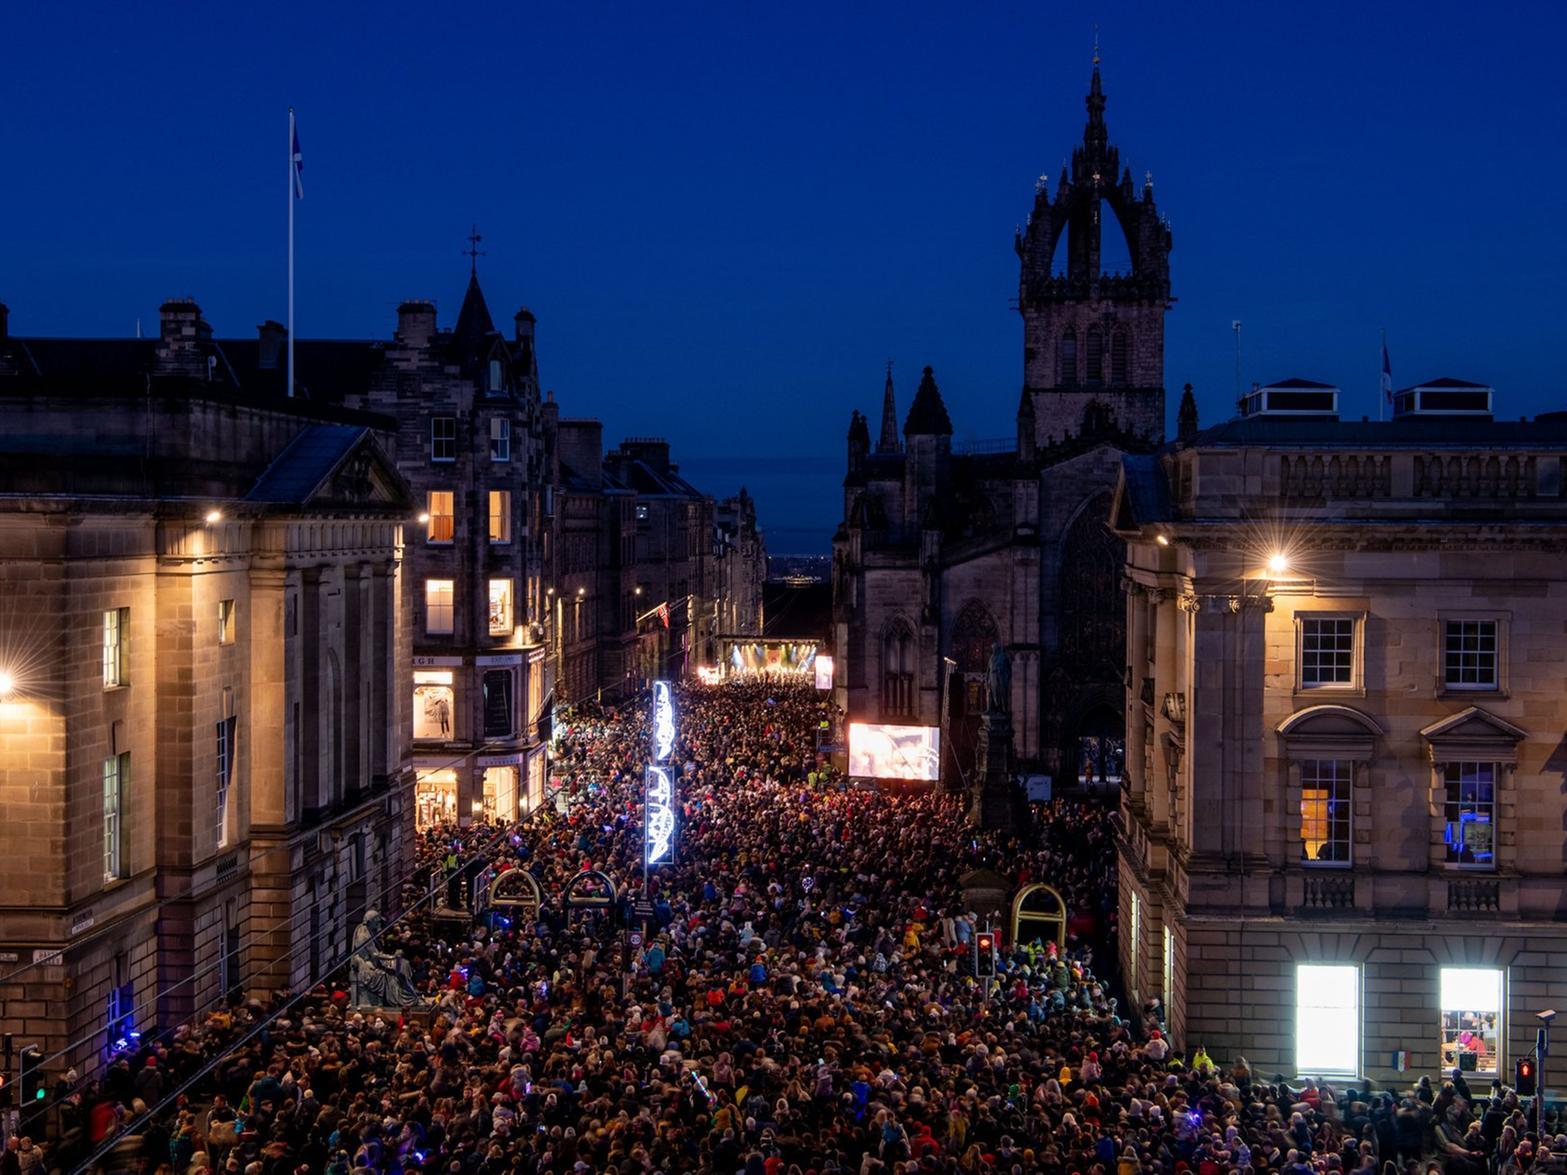 As the darkness began to blanket Scotland's Capital, the show stepped up a gear, with a light spectacular and the introduction of a 'flying' Santa